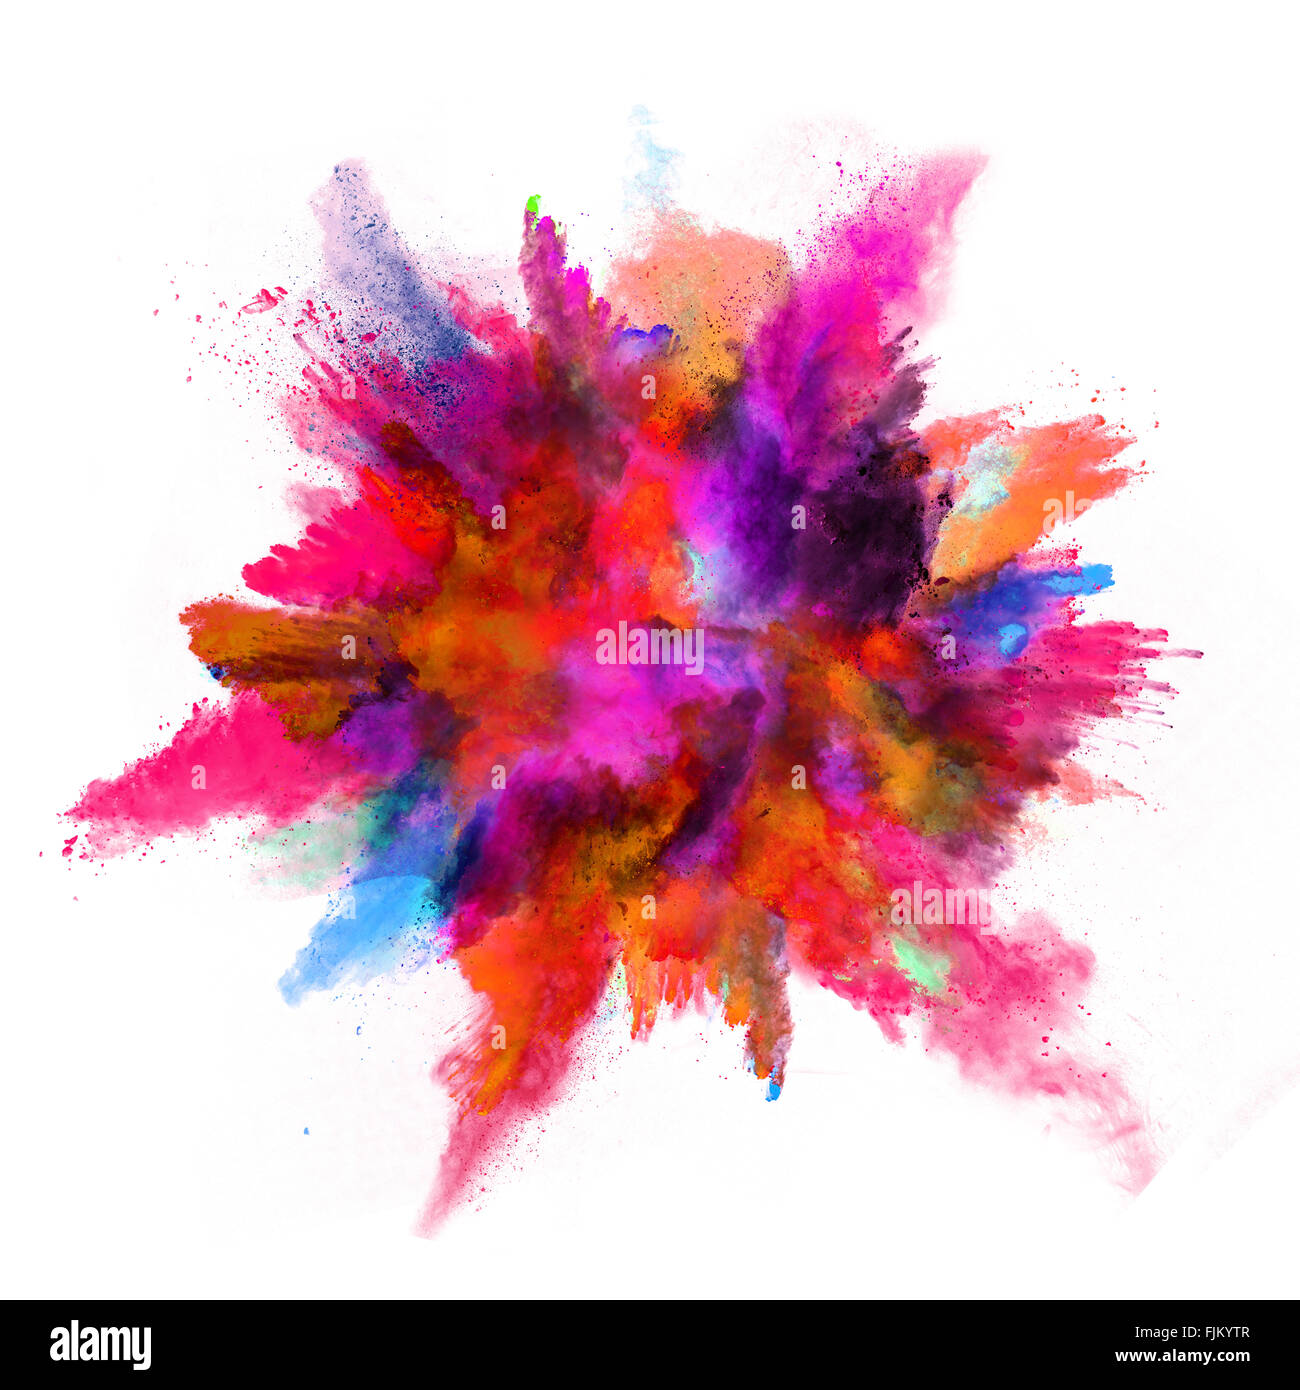 Explosion of colored powder on white background Stock Photo - Alamy